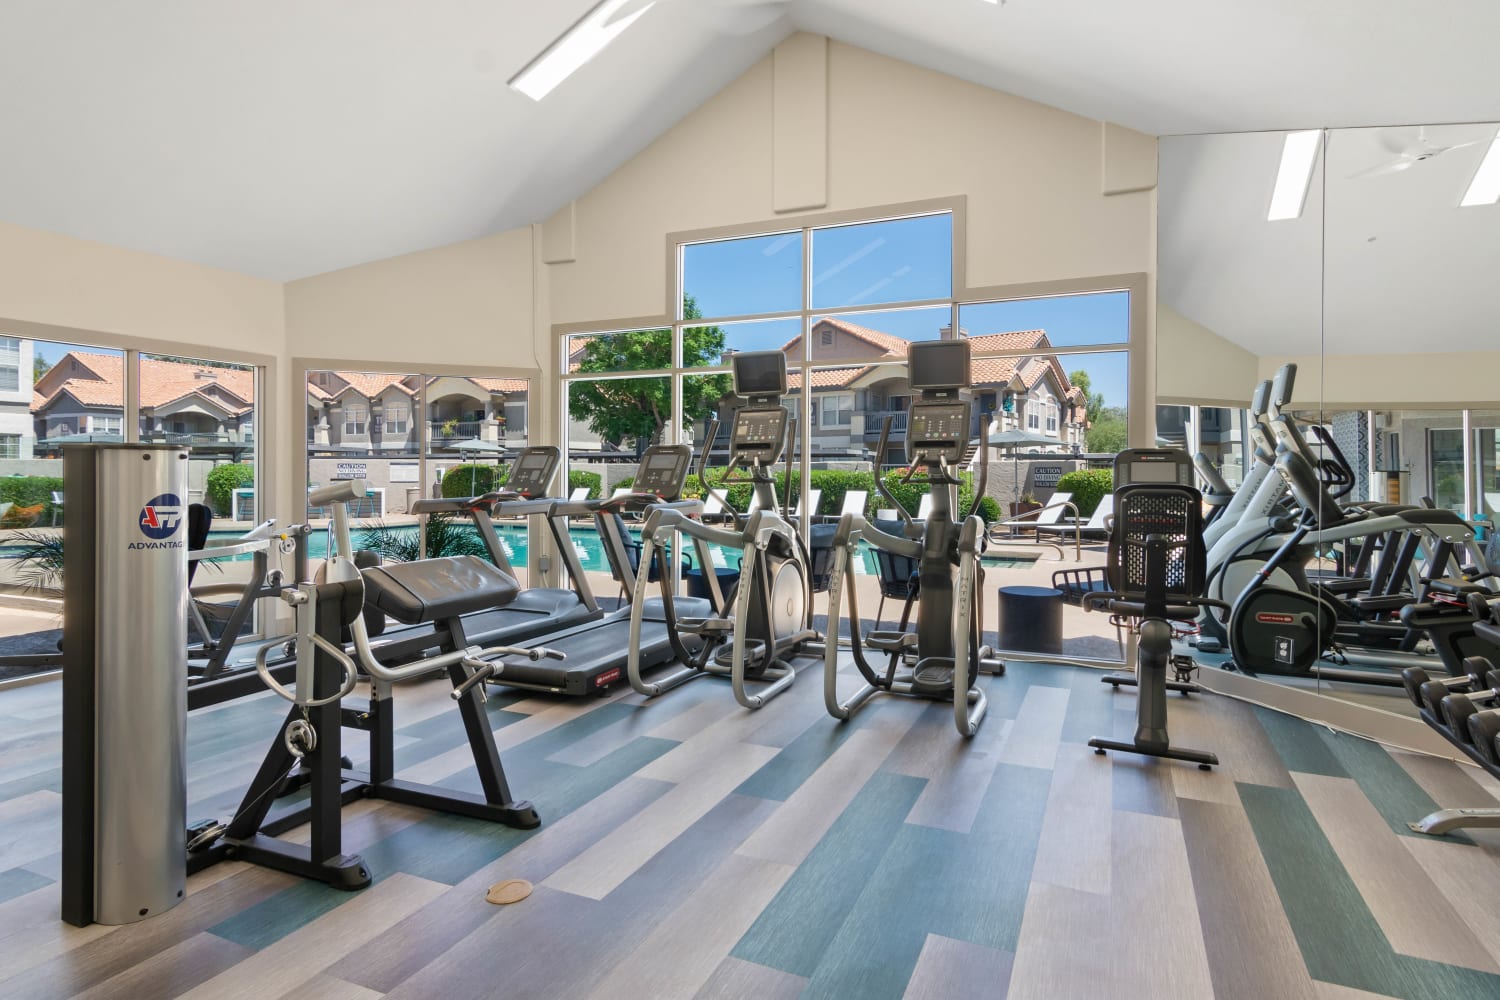 Enjoy apartments with a fitness center at Sonoran Vista Apartments in Scottsdale, Arizona